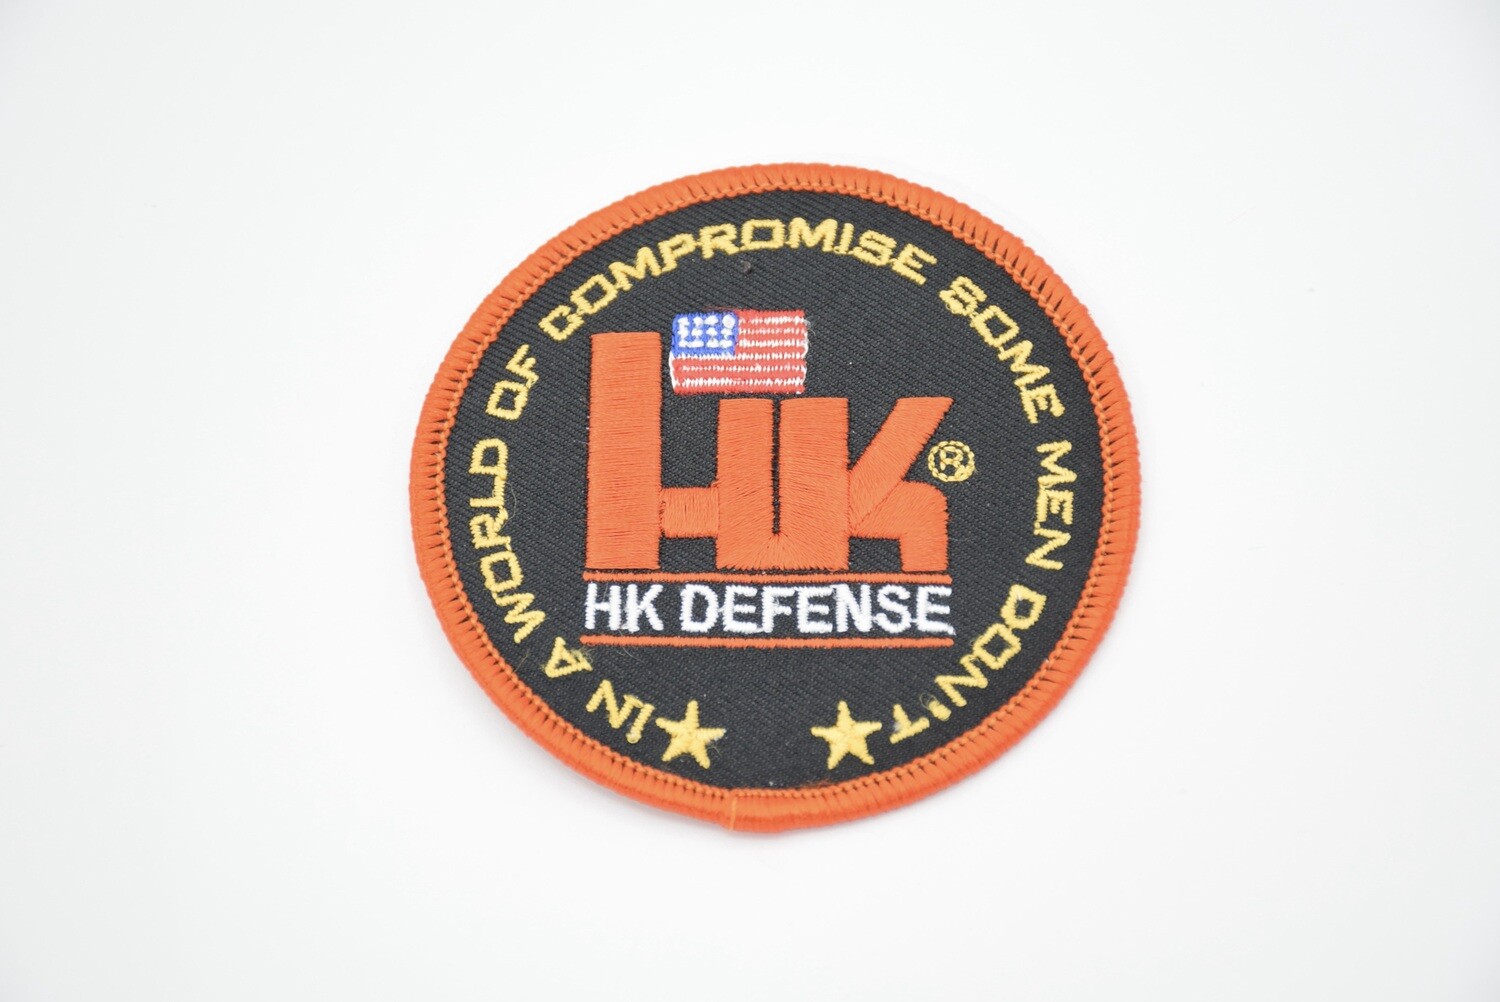 HECKLER  KOCH HK DEFENSE PATCH IN A WORLD OF COMPROMISE, SOME DON'T